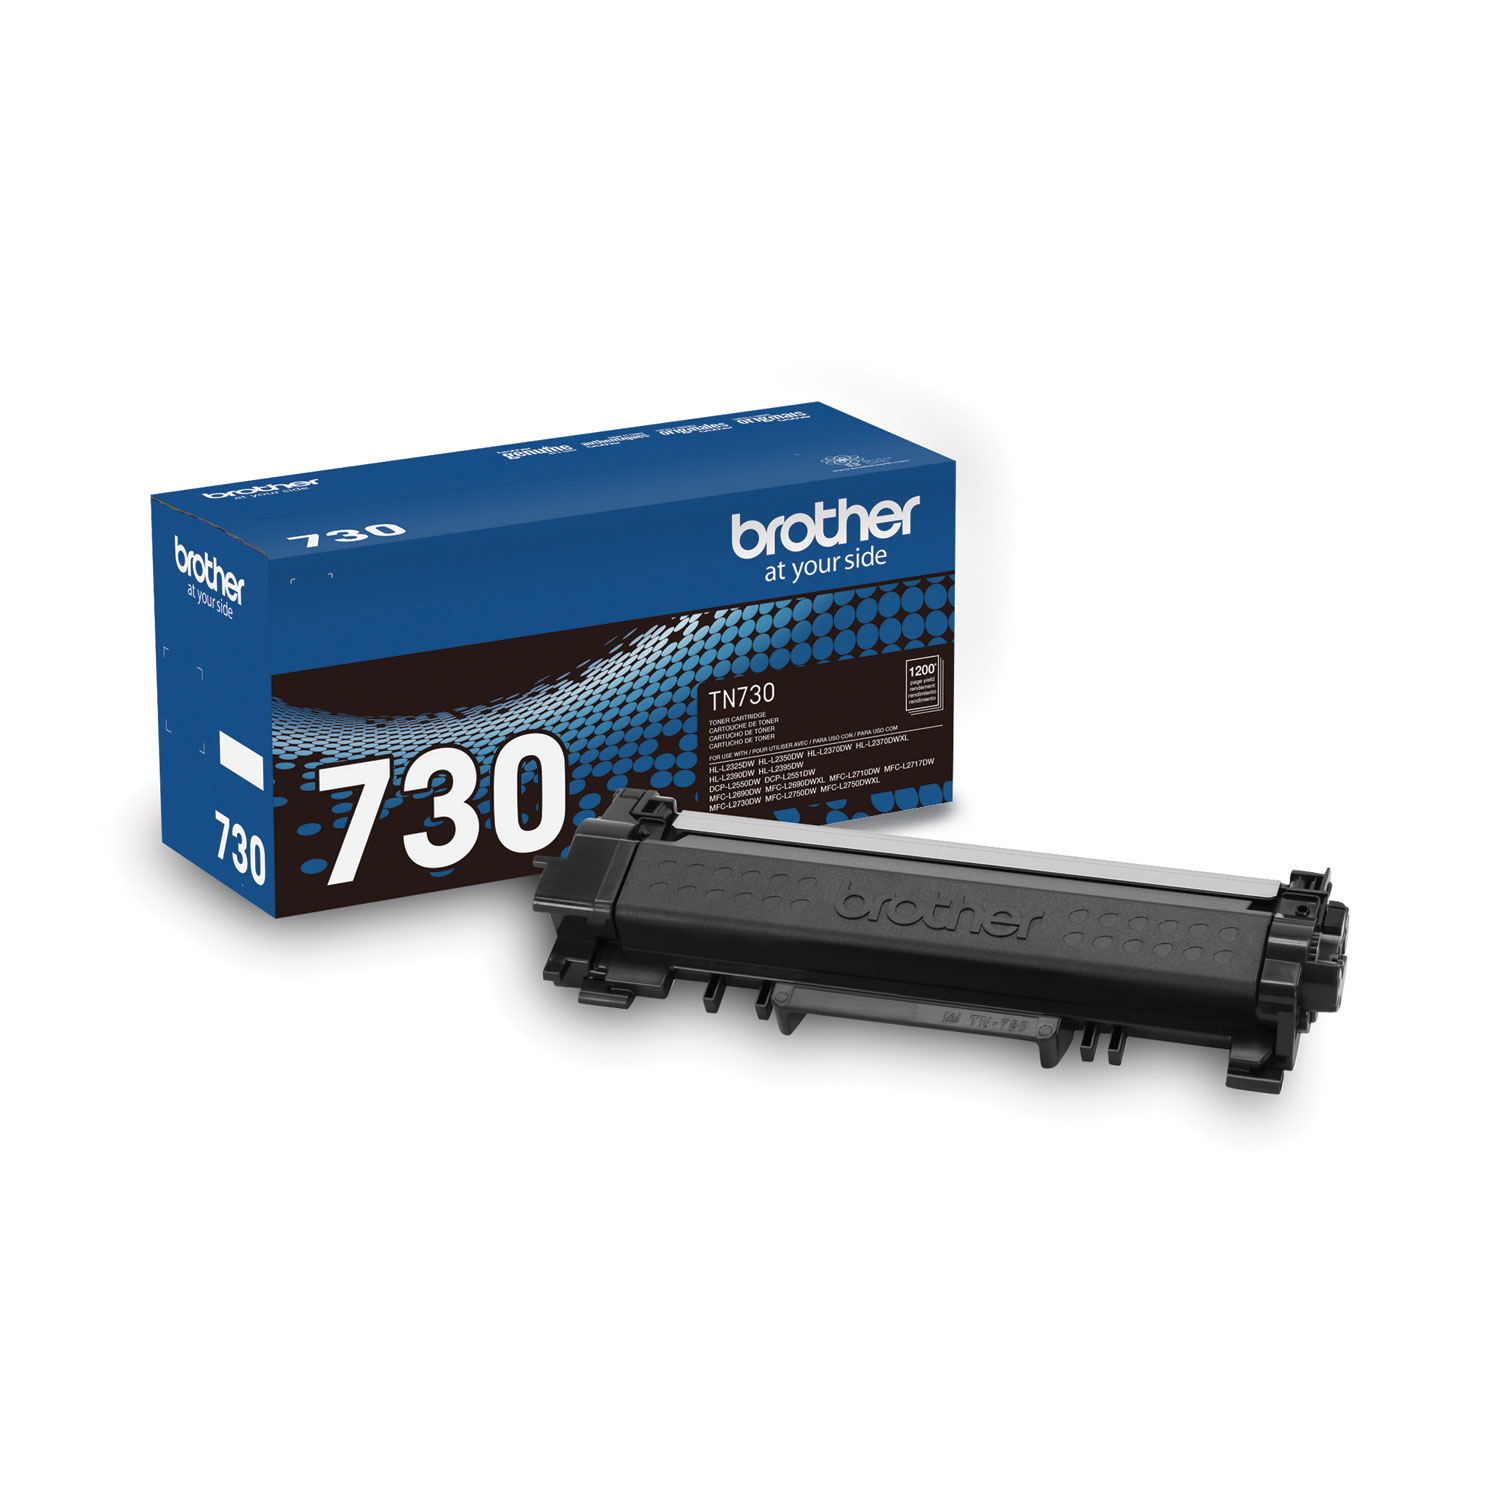 TN730 Toner, 1,200 Page-Yield, Black - Egyptian Workspace Partners